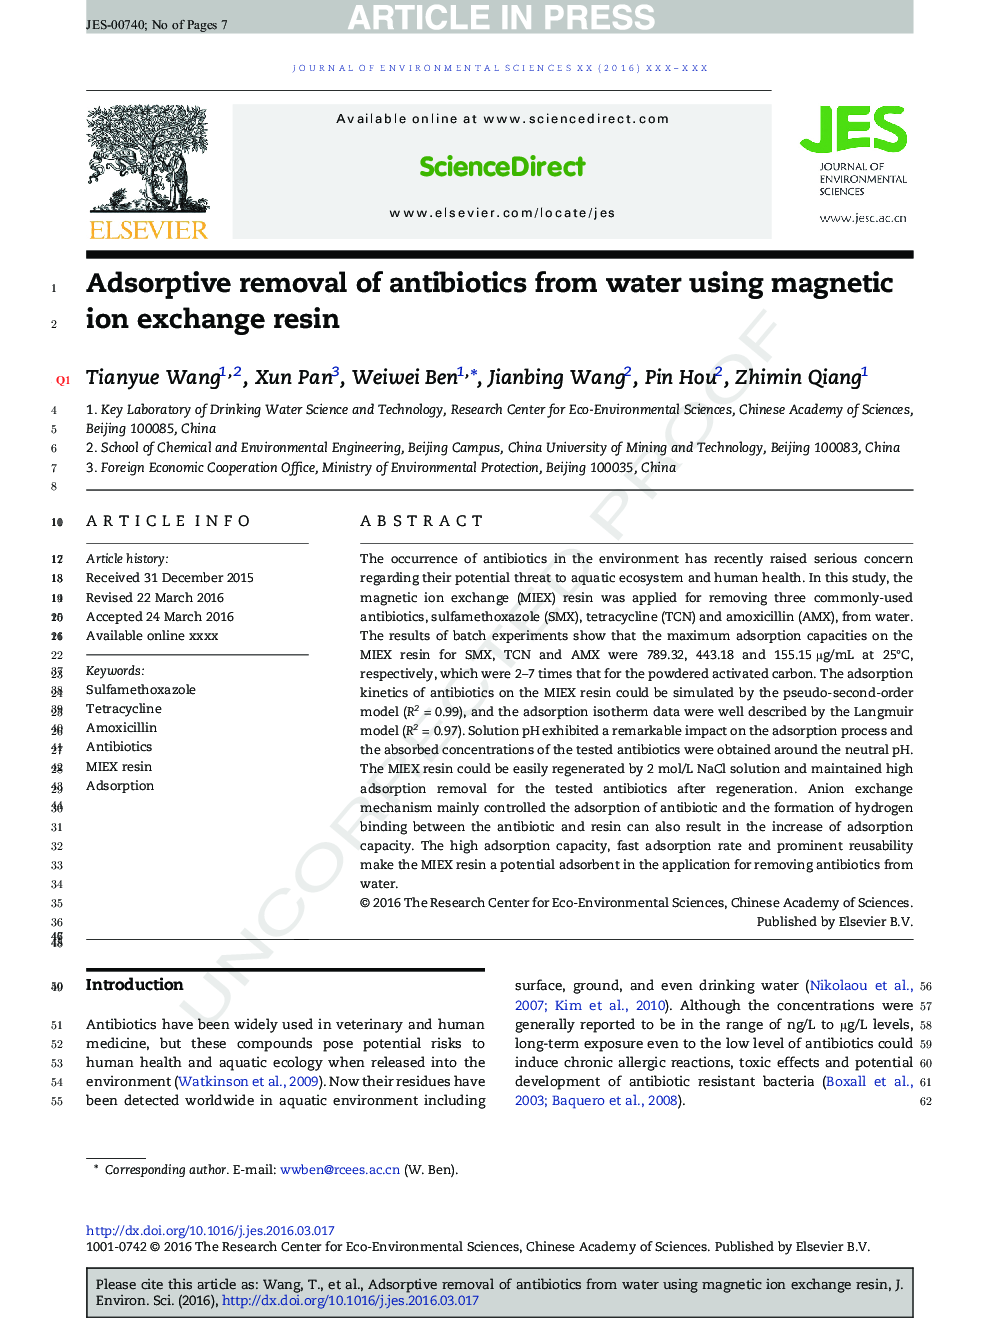 Adsorptive removal of antibiotics from water using magnetic ion exchange resin